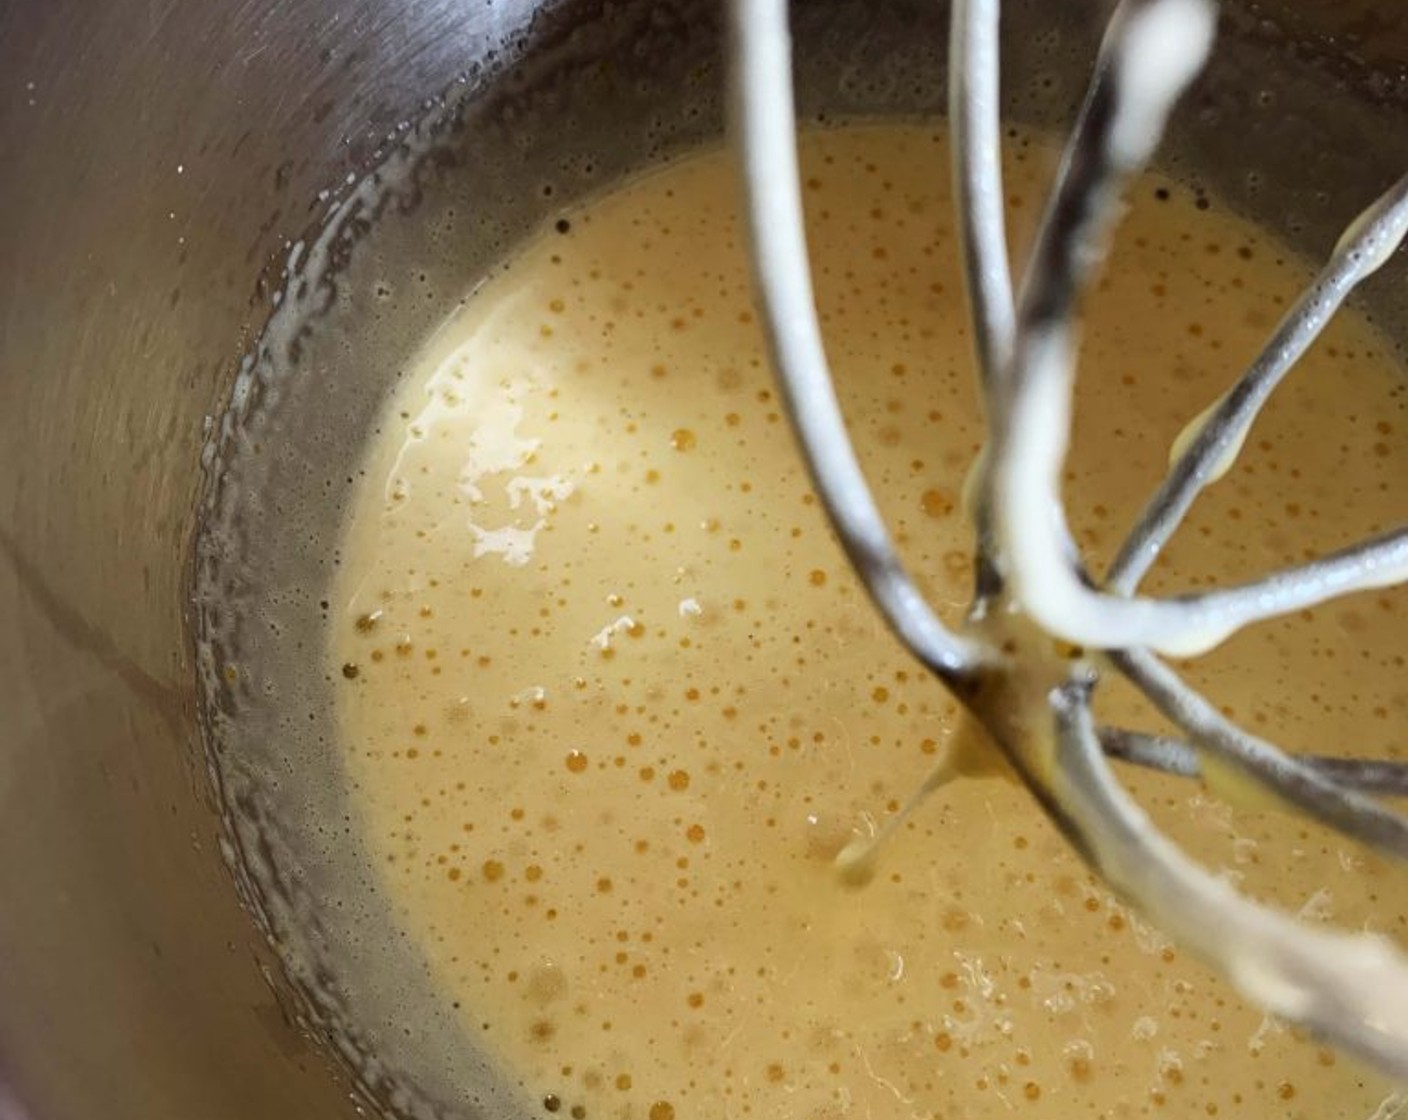 step 2 In the bowl of your electric mixer beat together Organic Eggs (3), Granulated Erythritol (3/4 cup), Salt (1 pinch), Vanilla Extract (1 tsp), and Orange (1). Whisk for about 5 minutes, until you get a foamy and light-colored mixture.